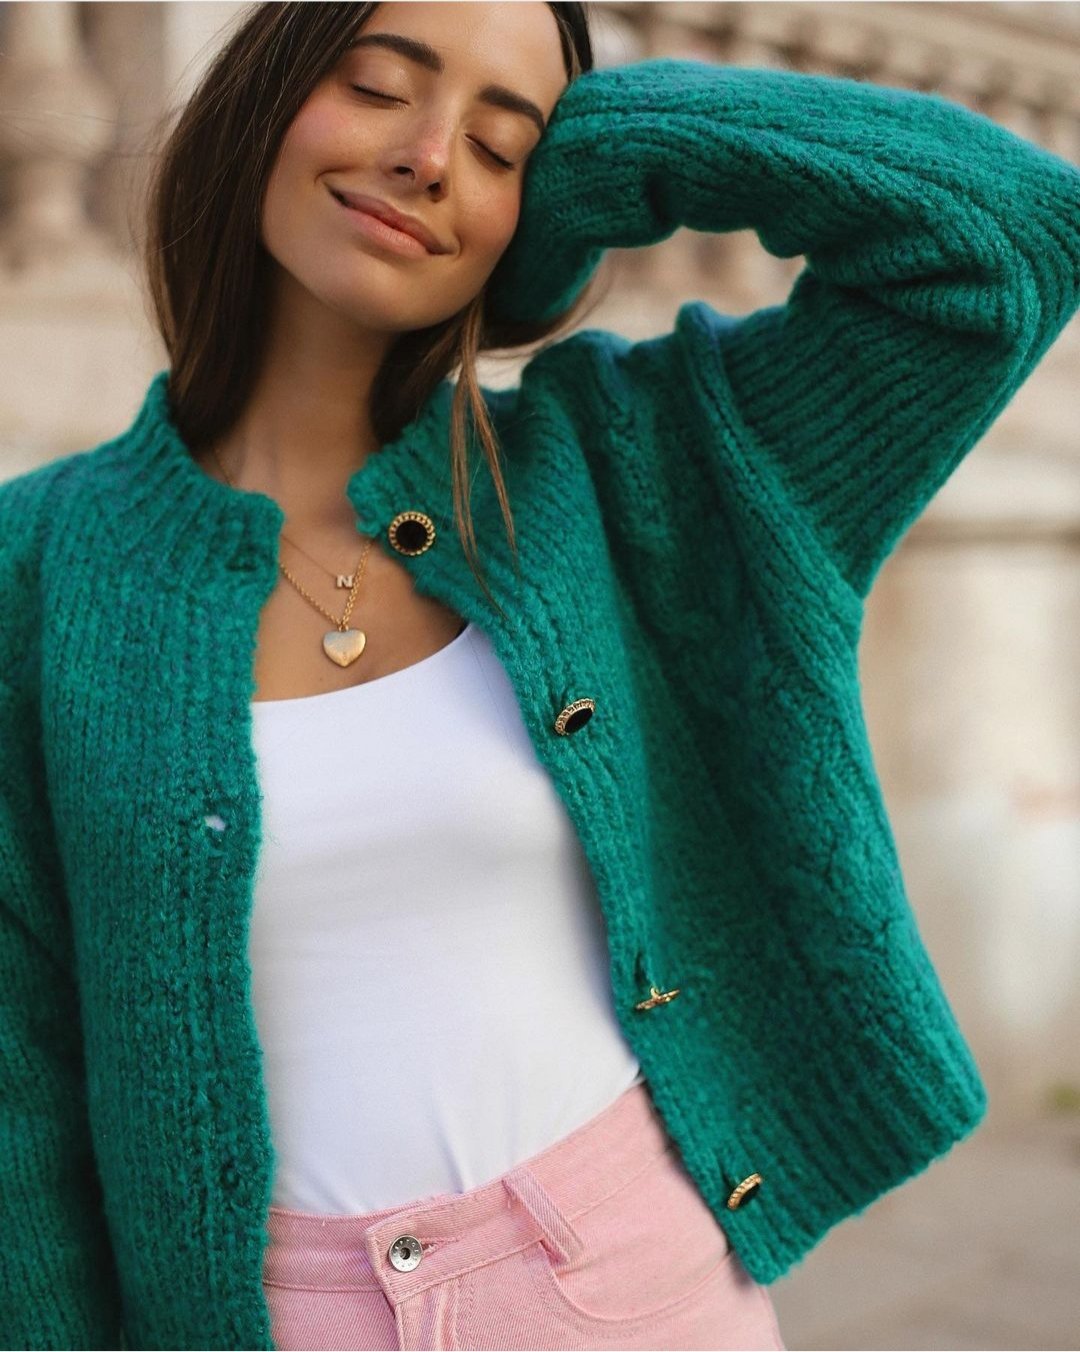 The Sweaters That Will Matter This Winter